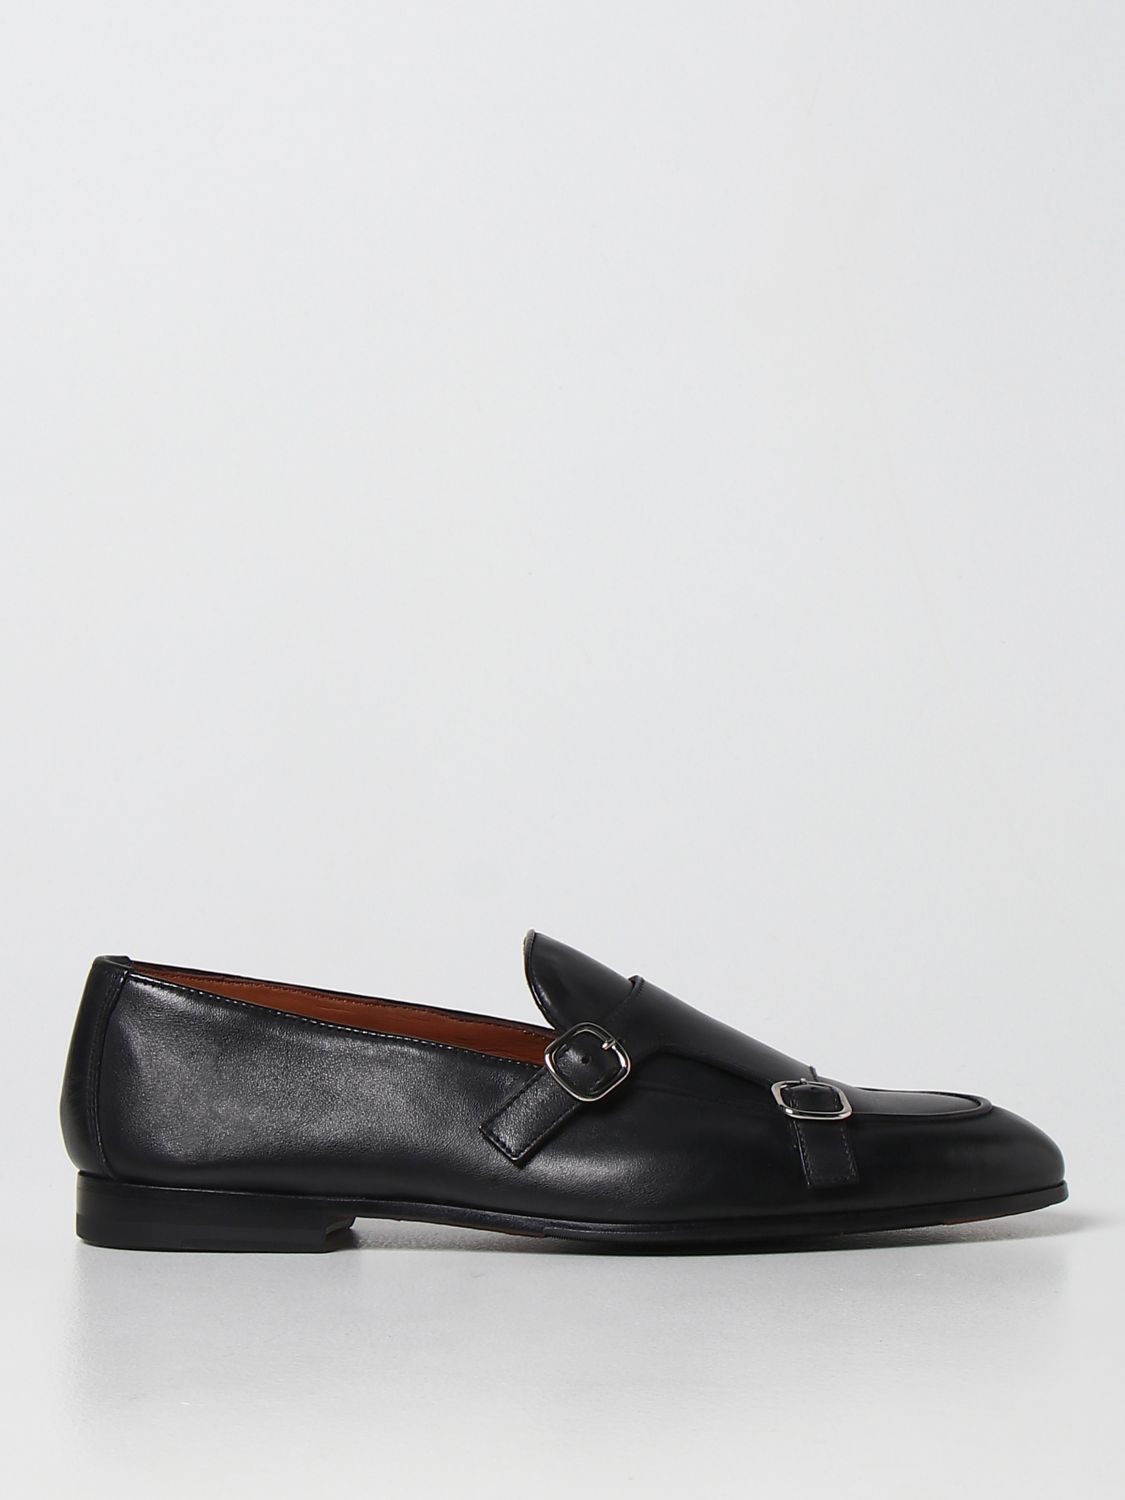 DOUCAL'S: Monkstrap in smooth leather - Black | Doucal's shoes ...